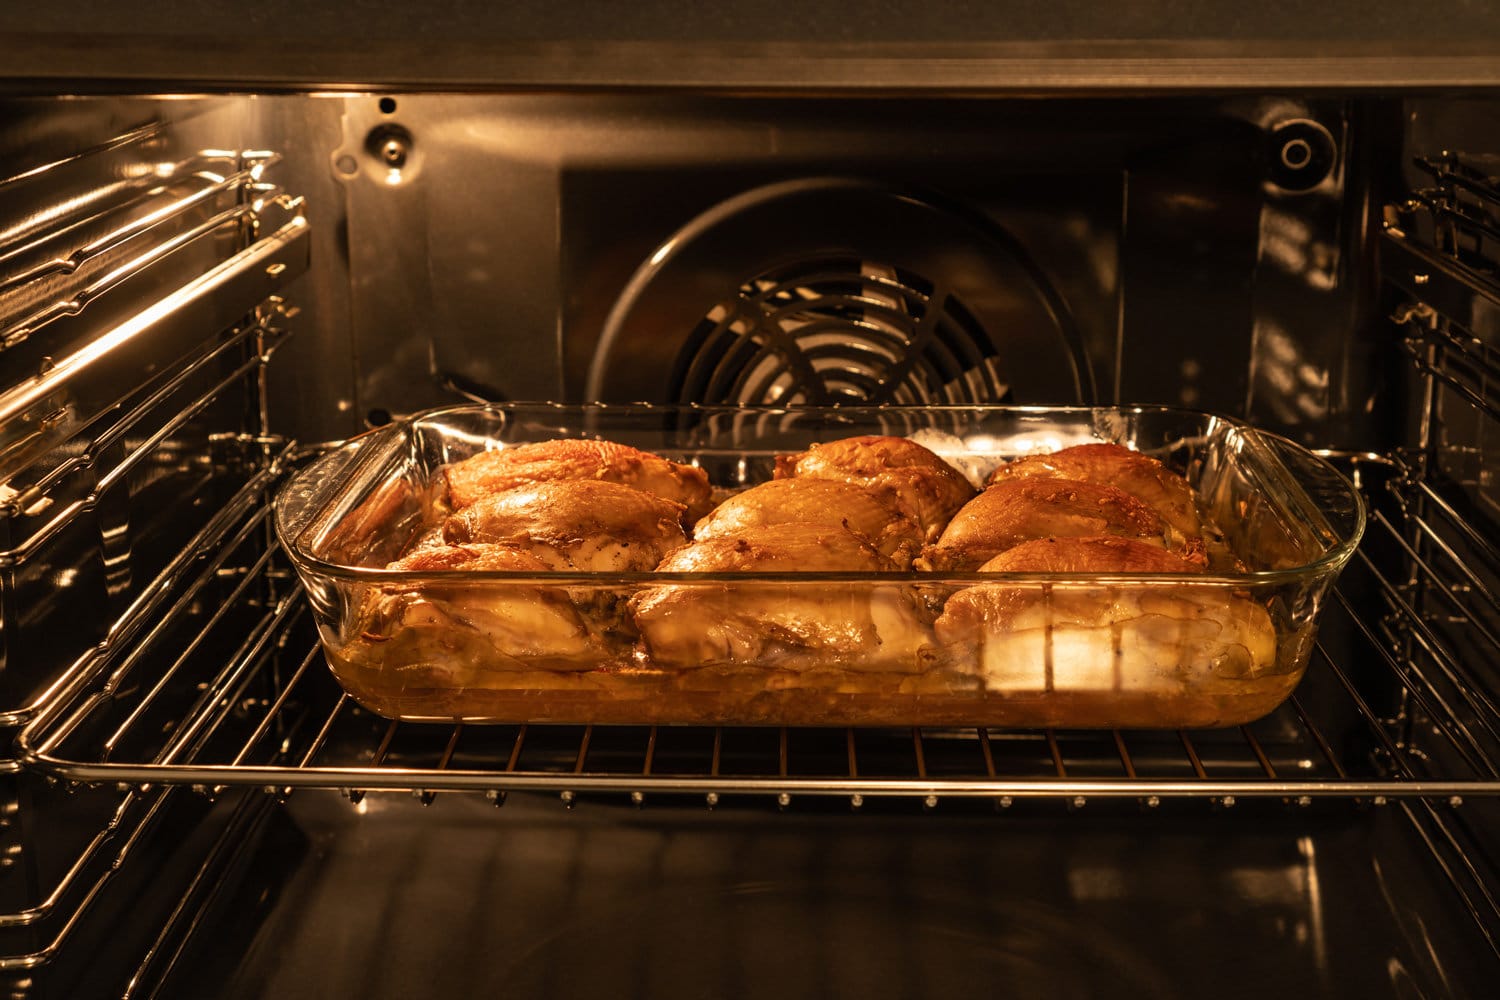 Chicken thighs baked in the oven in glass pan. Homemade food.